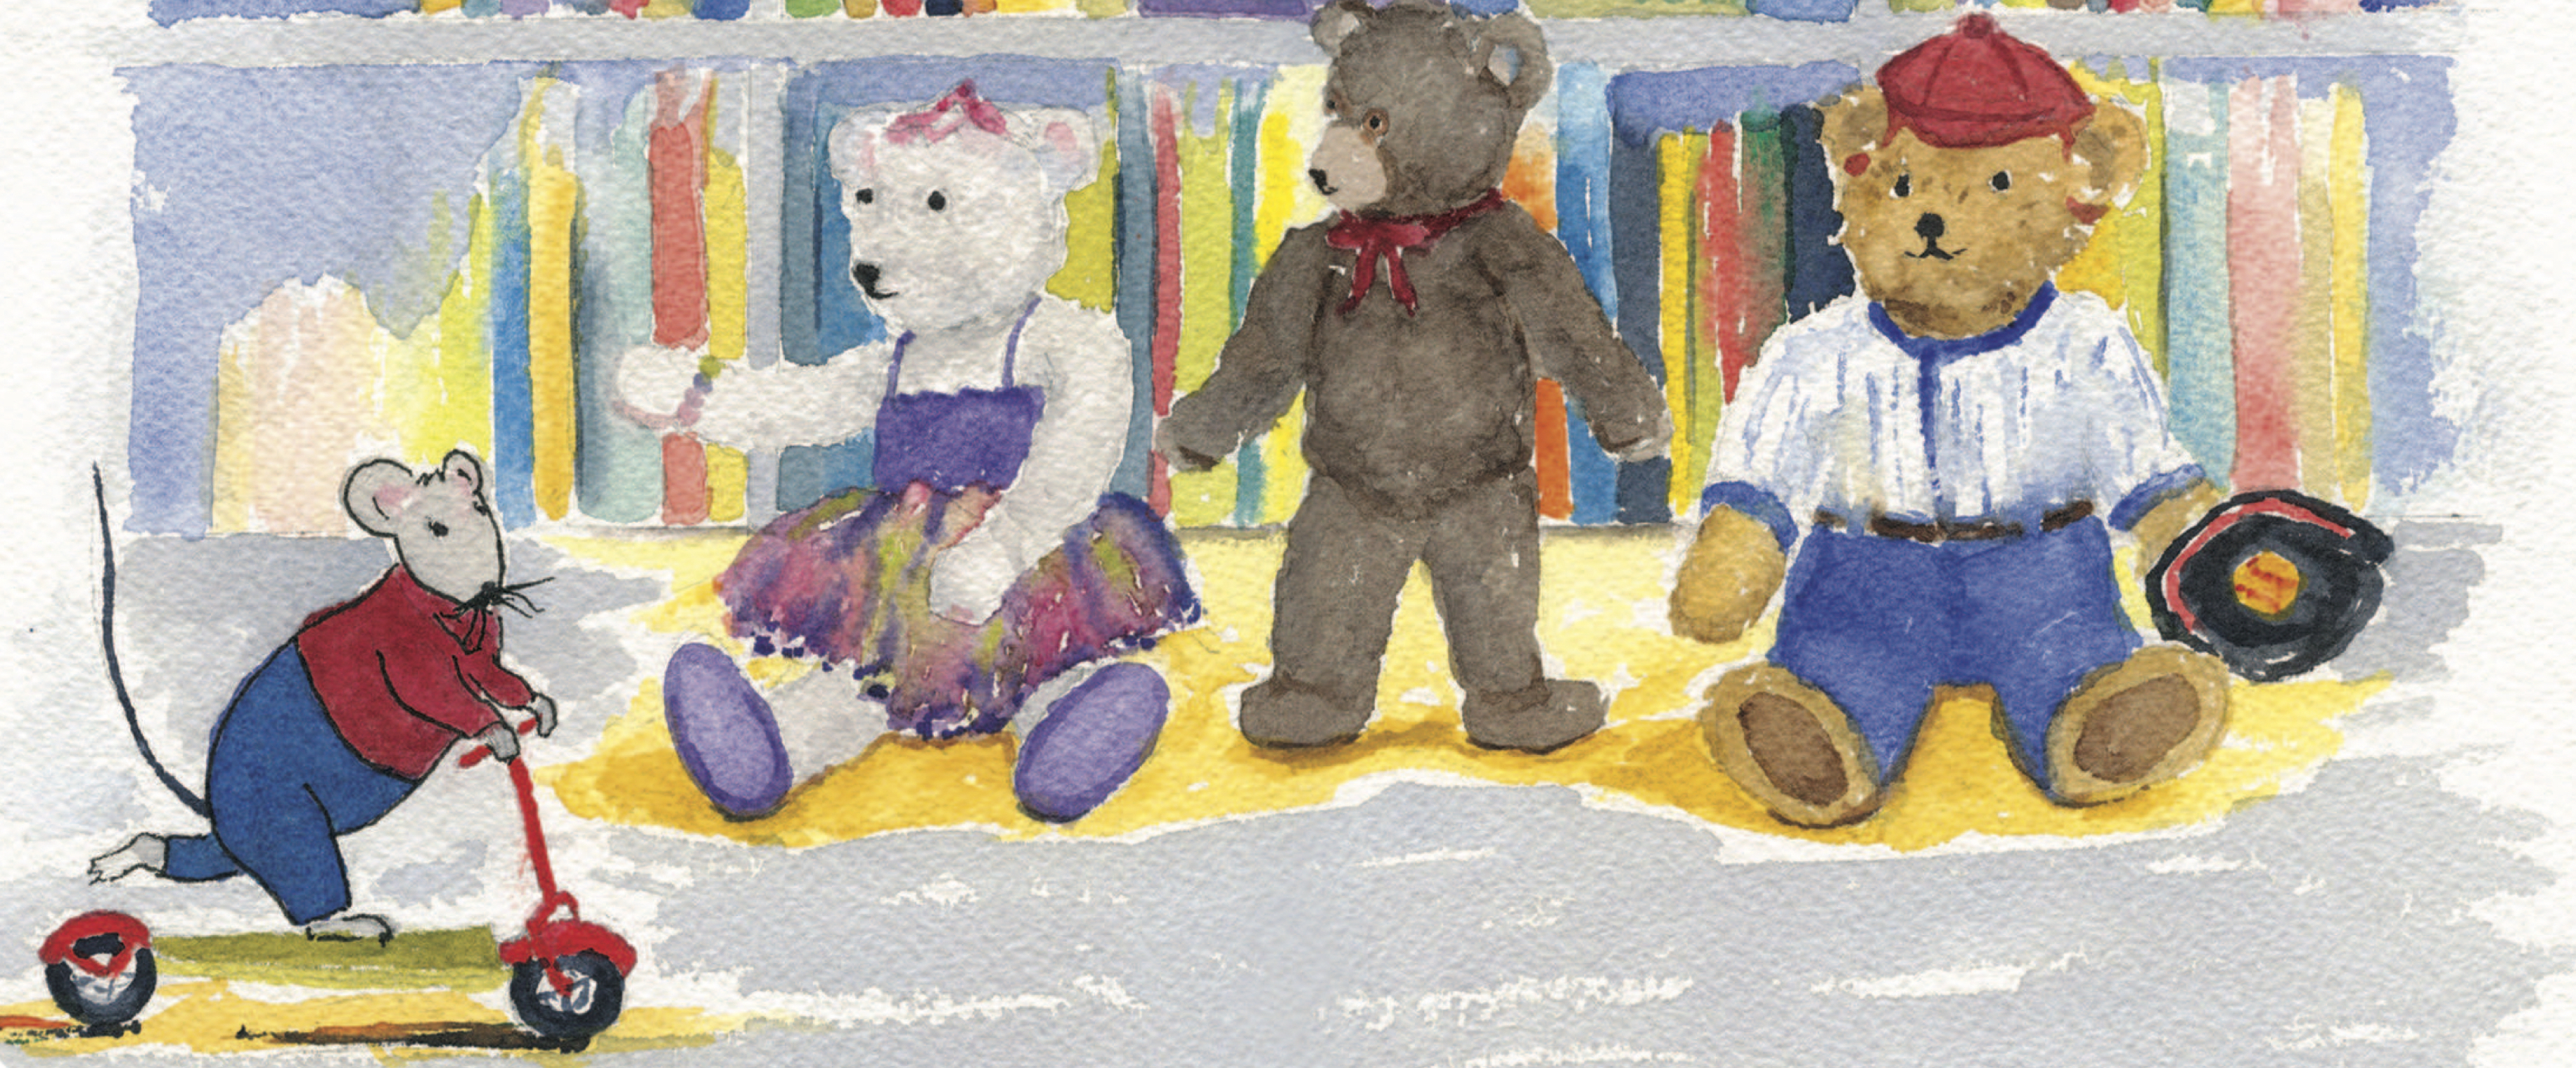 Fall 2019 Issue of Mississippi Libraries review of Scooter Mouse and the Teddy Bears